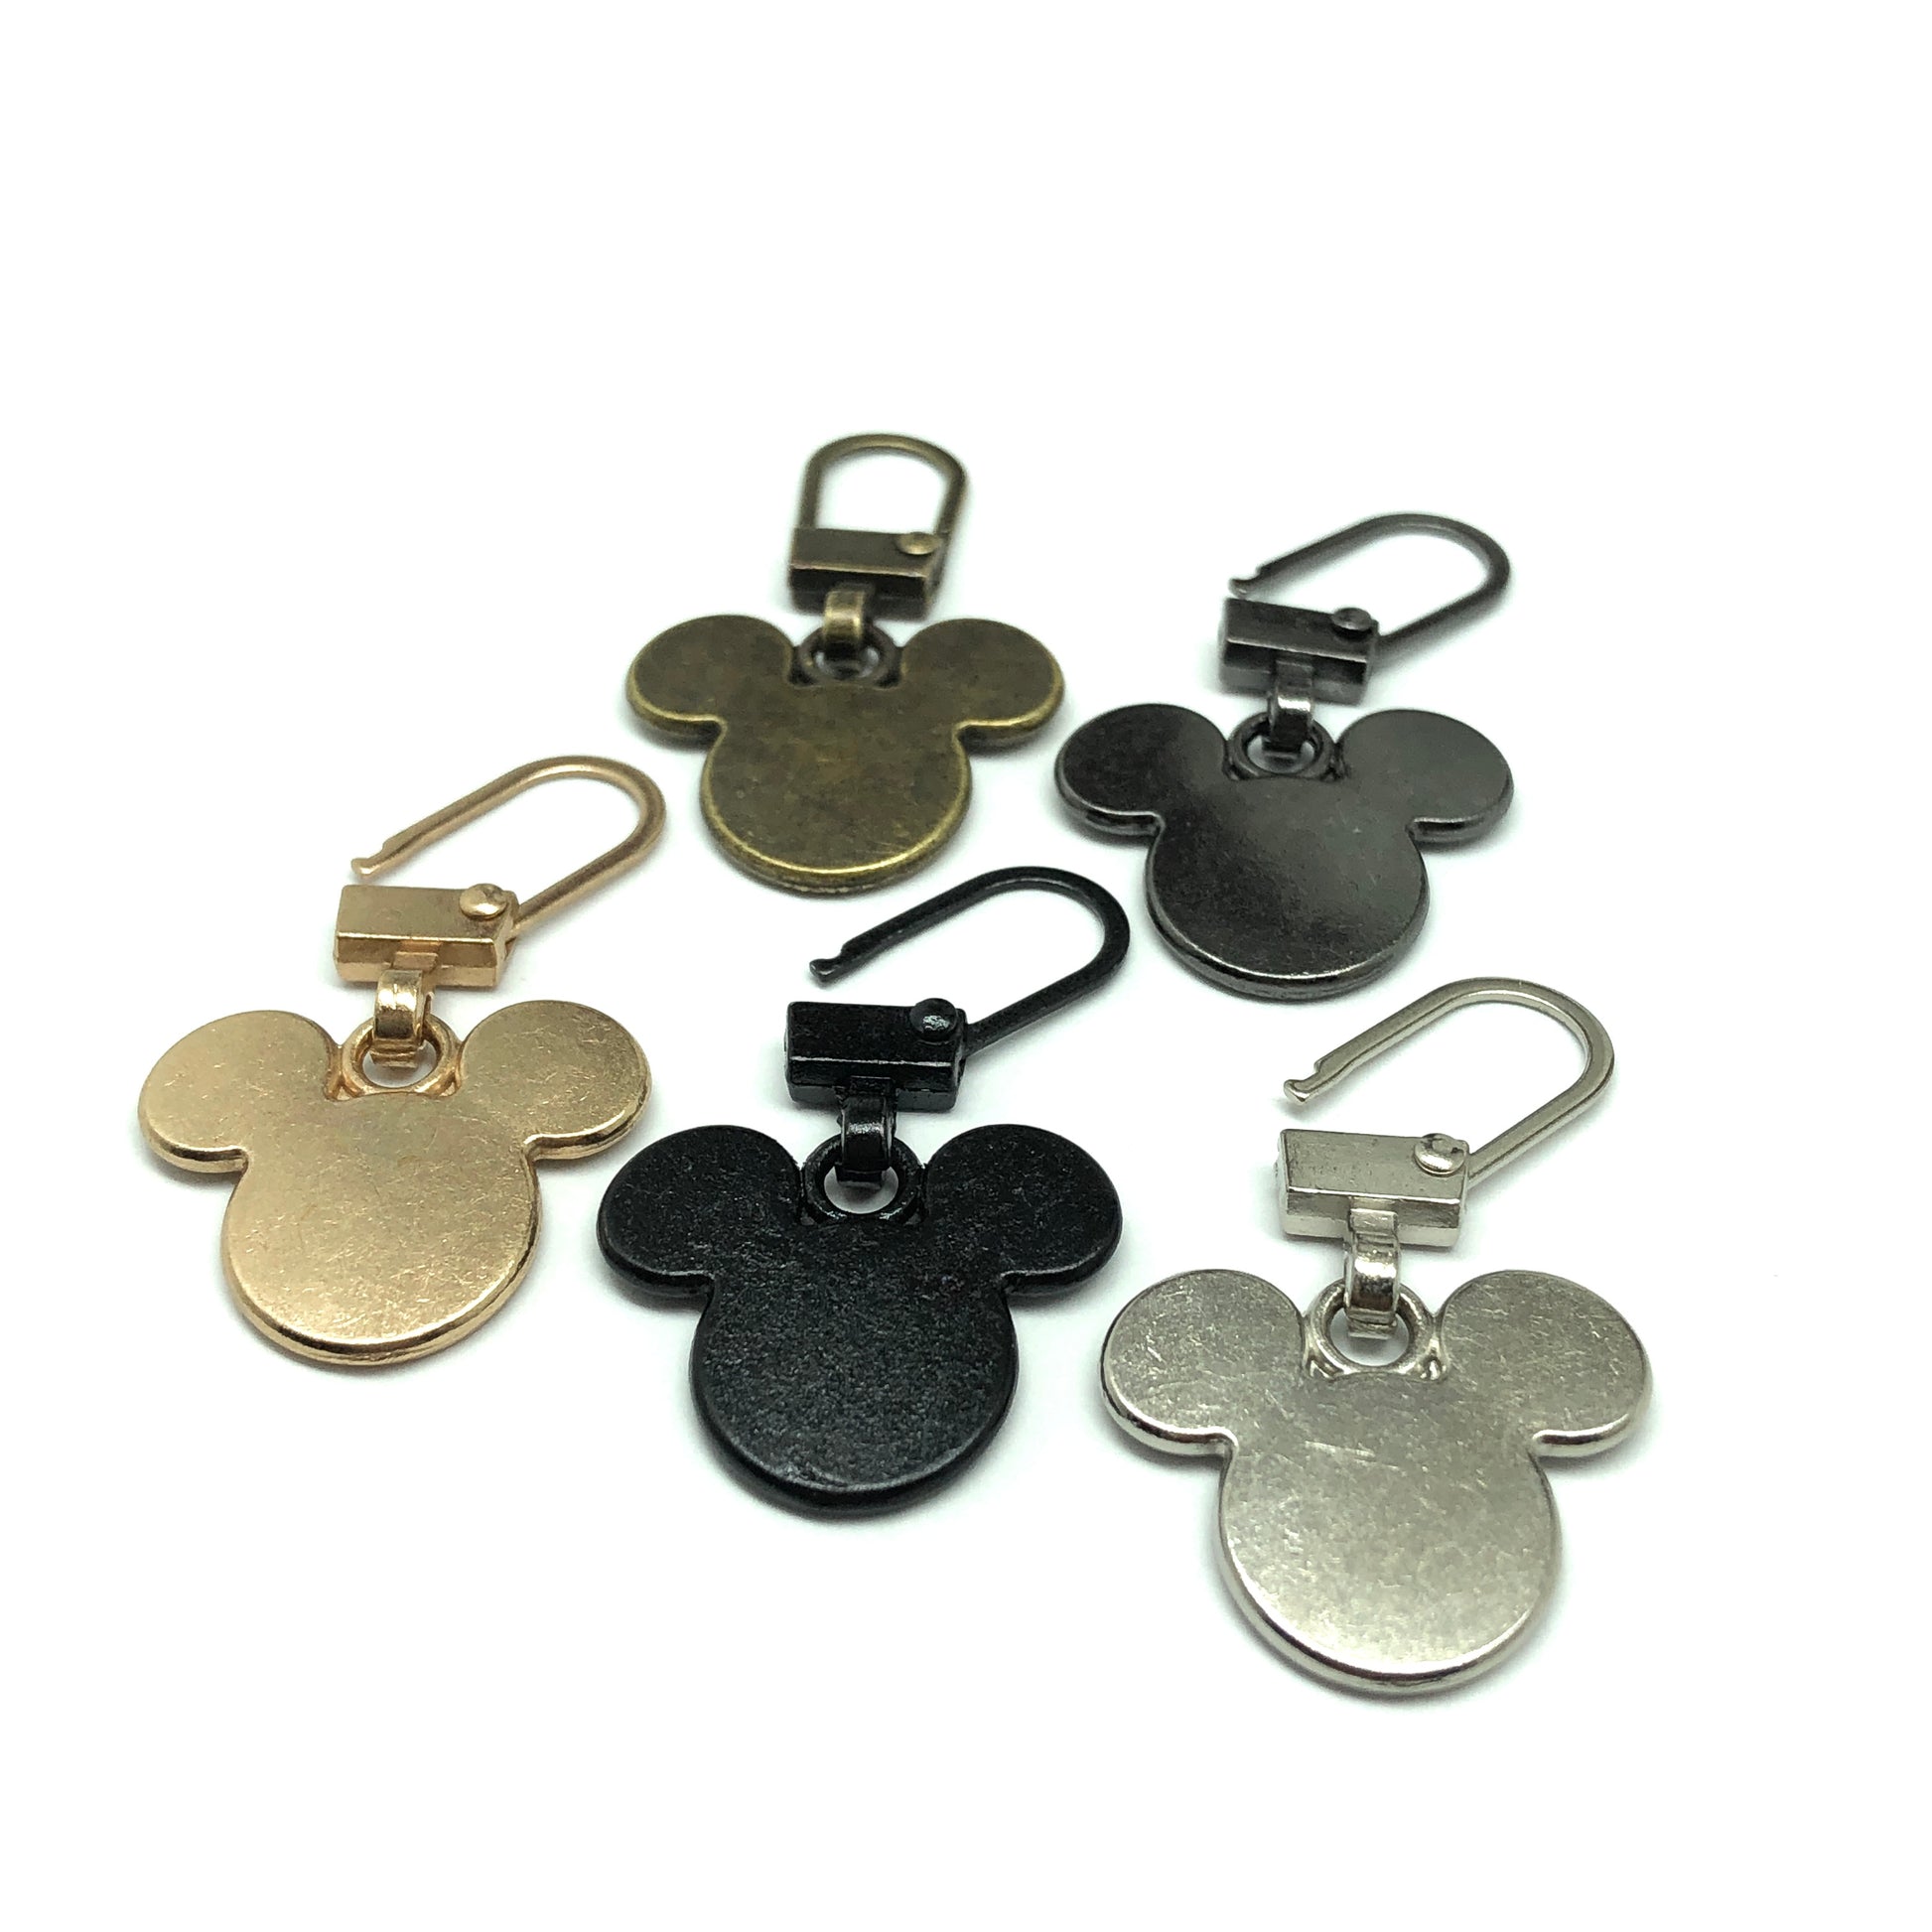 Zipper Repair Charms, Mickey Mouse Zipper Pull Repair Charm Rustic Bronze  - for Repair or Decorate Shoes, Purses, Keychains + More